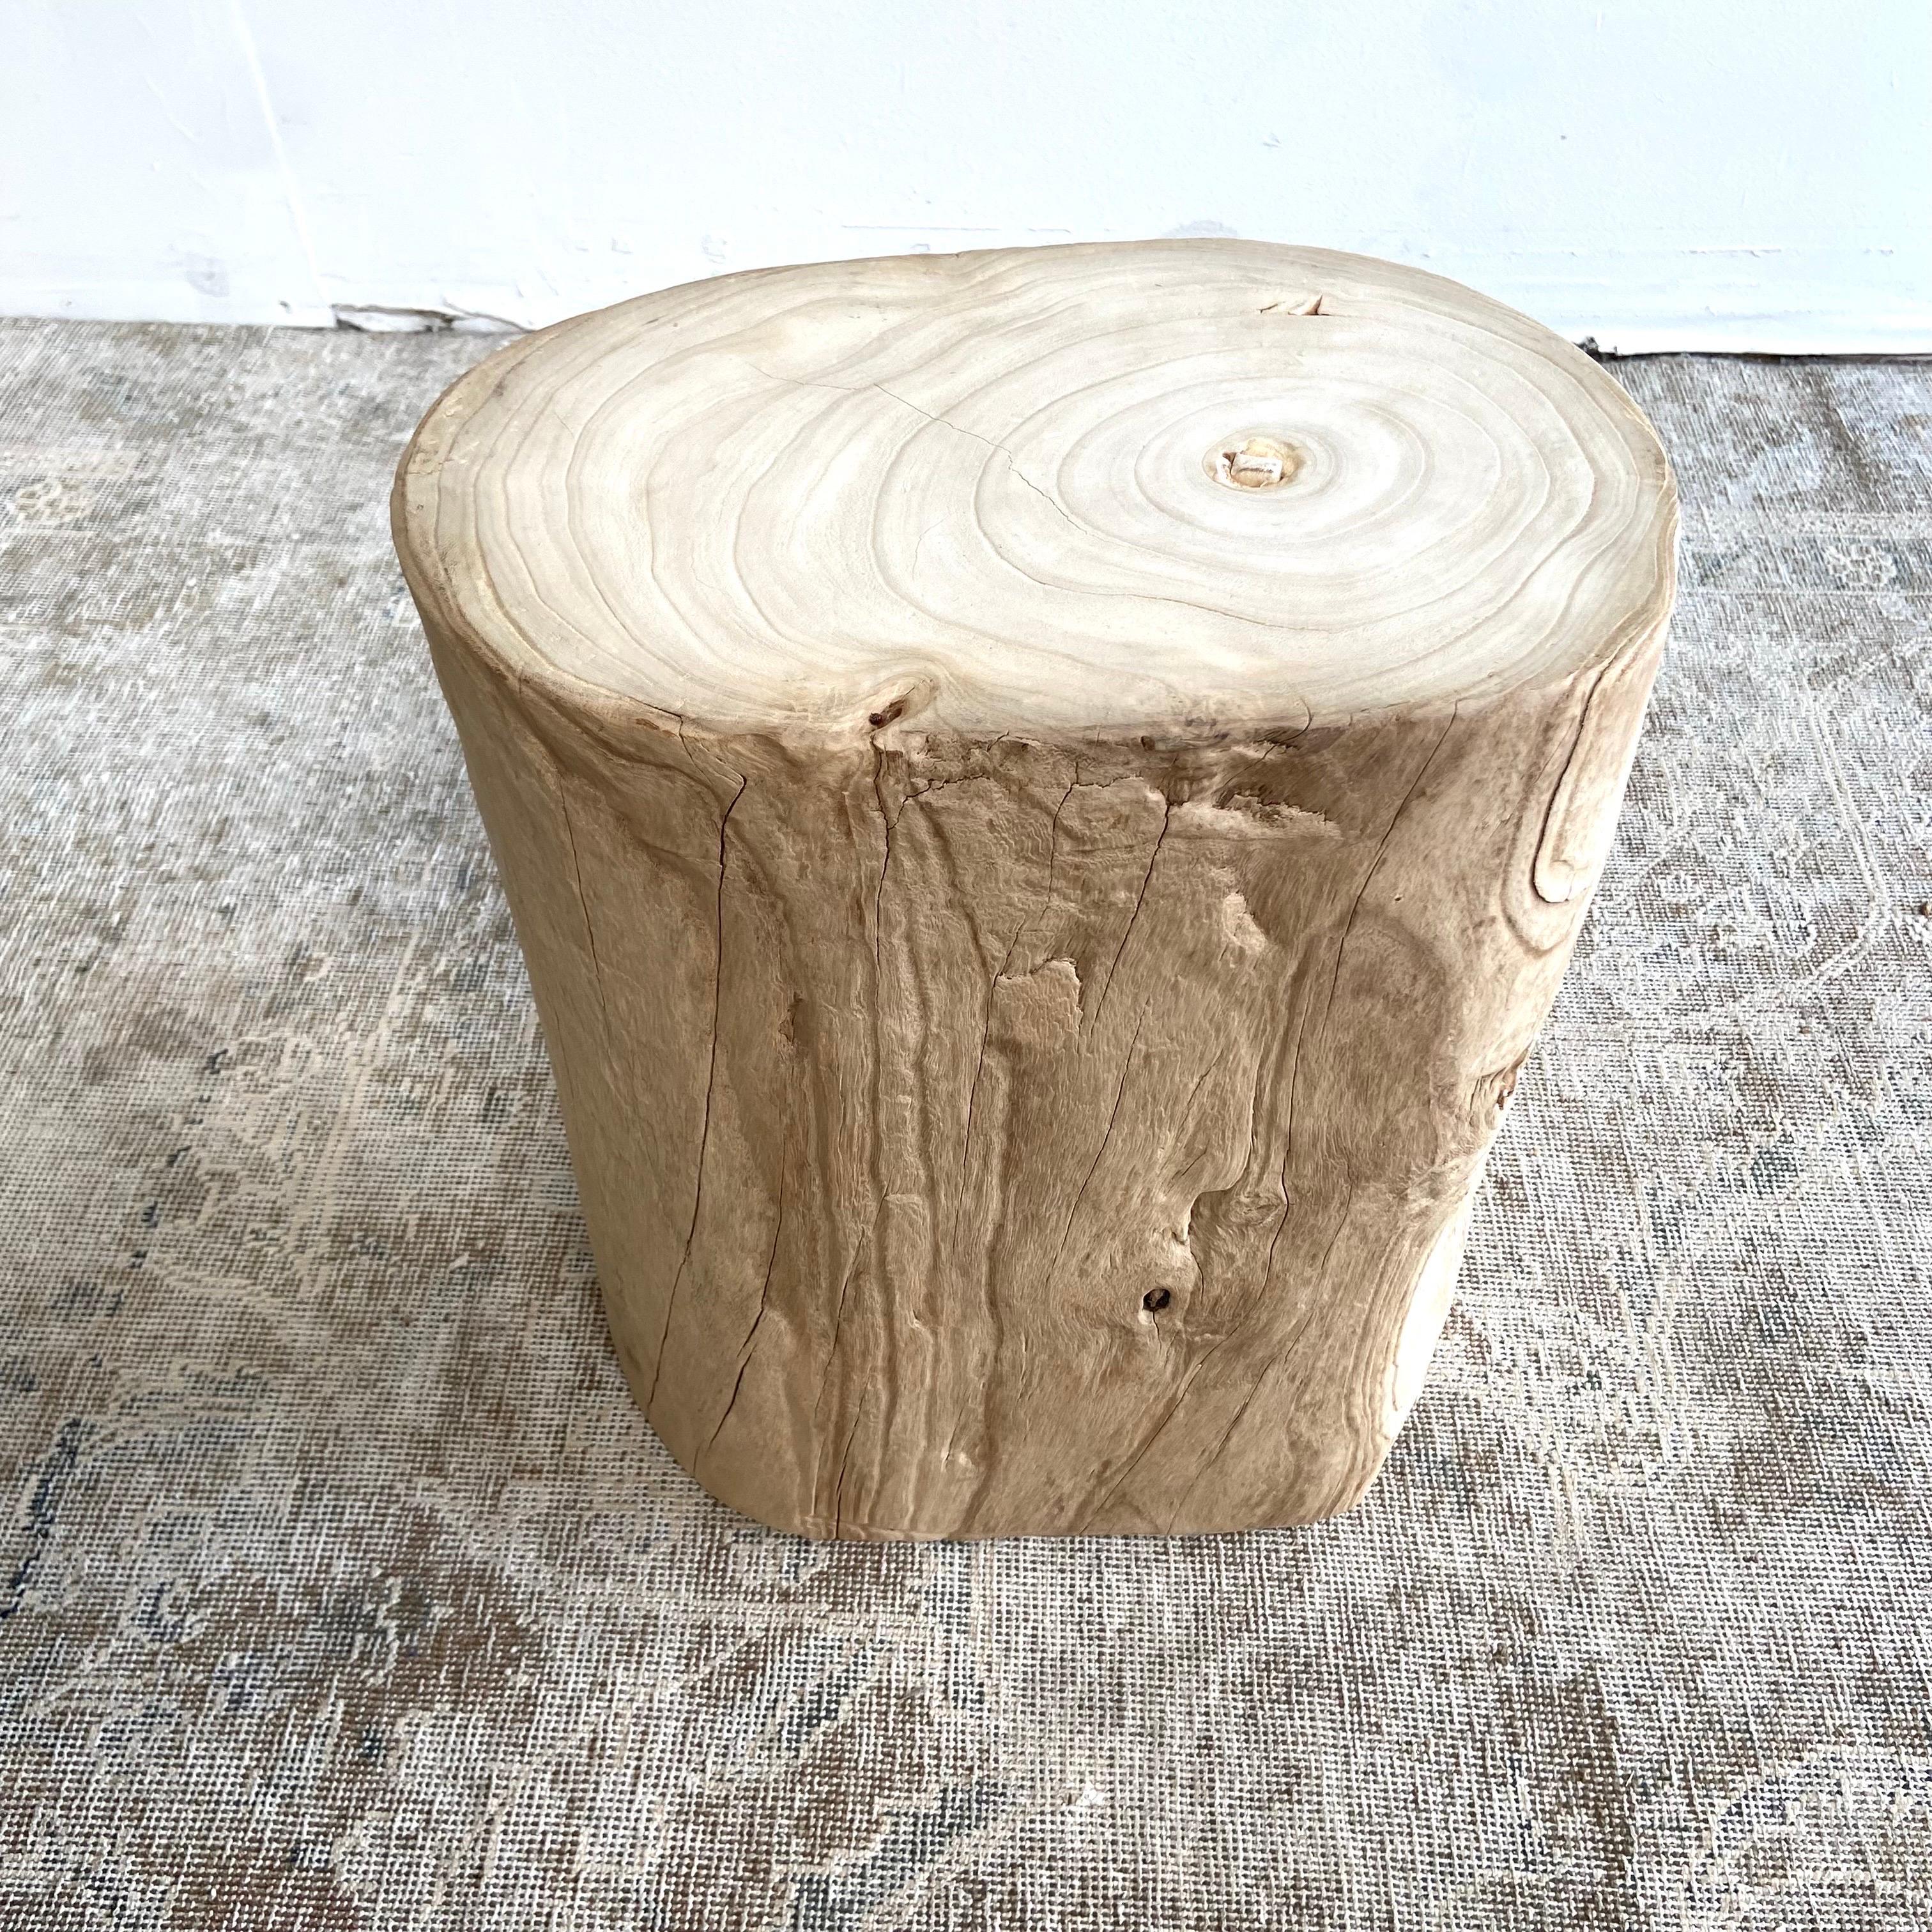 Natural wood side table stump. Beautiful solid stump, great for use as a side table, drink table, or bath. A great architectural accent for any room. This stump has very unique characteristics, grooves, and movement. Solid sturdy, ready for daily